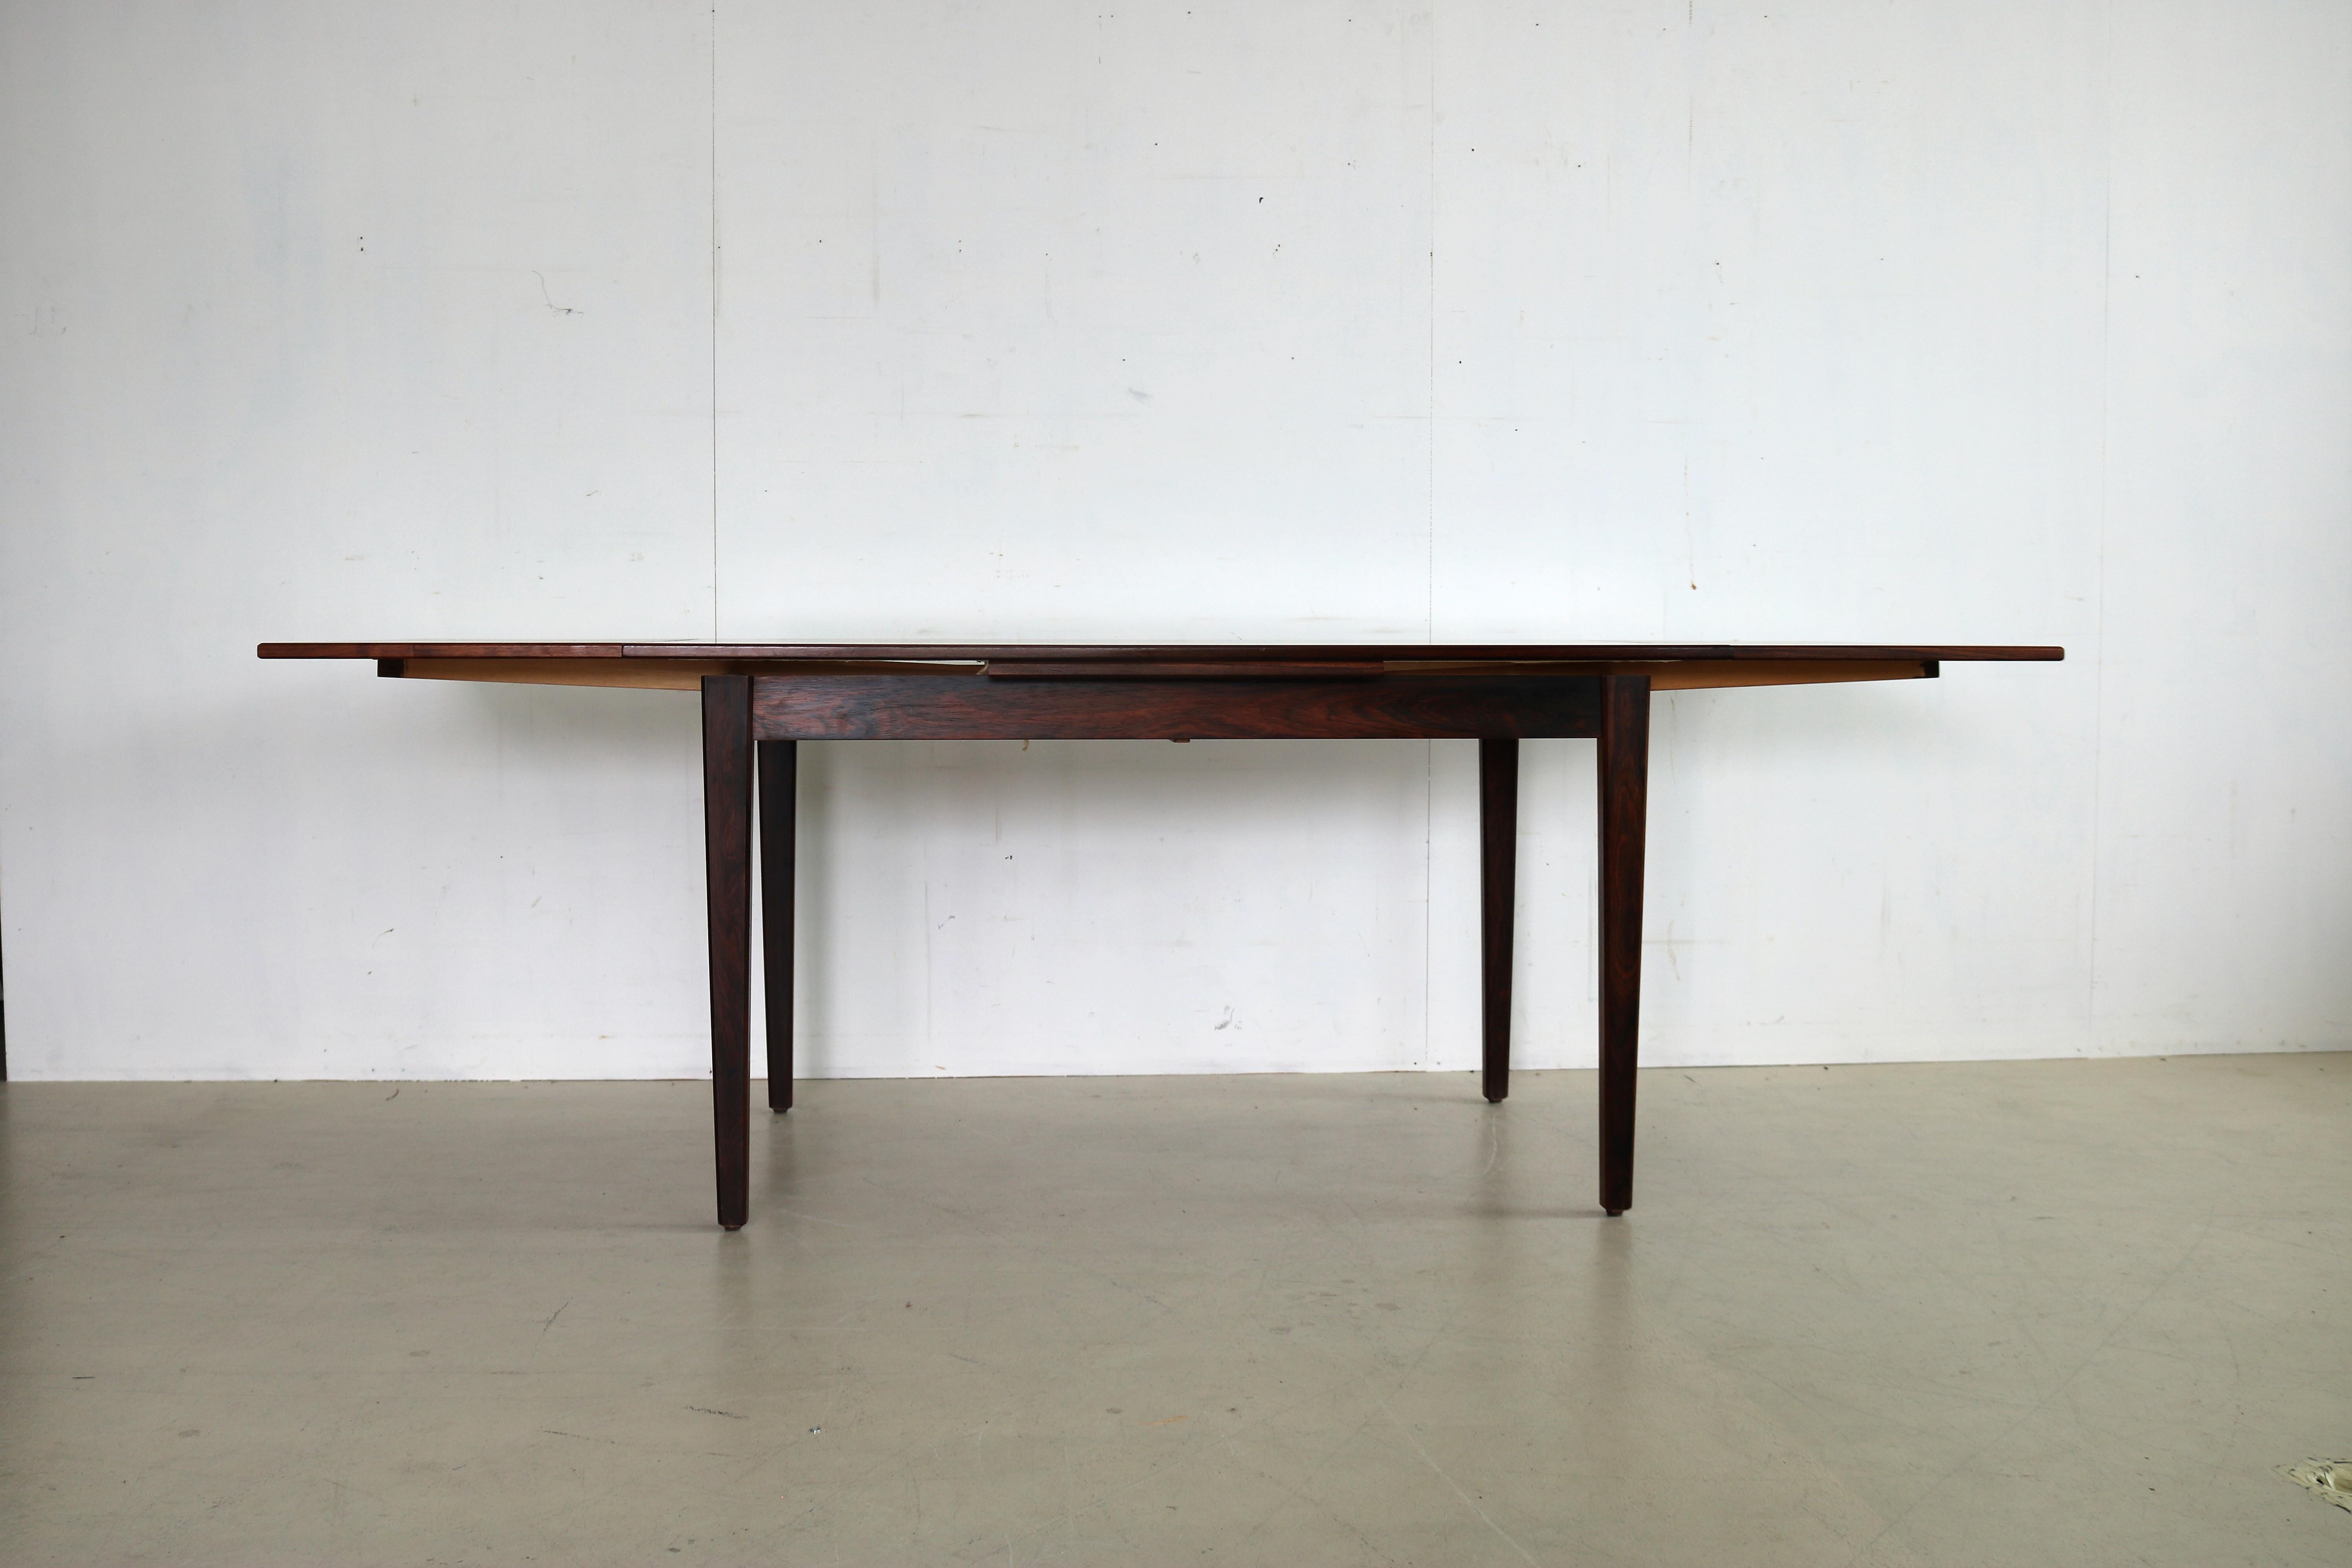 vintage dining table table 60s Denmark

period 60's
designs Sejling Skabe Denmark
conditions good light signs of use
size 75 x 138/227 x 87 (HxWxD)

details rosewood; 2 pull-out leaves;

article number 1635.